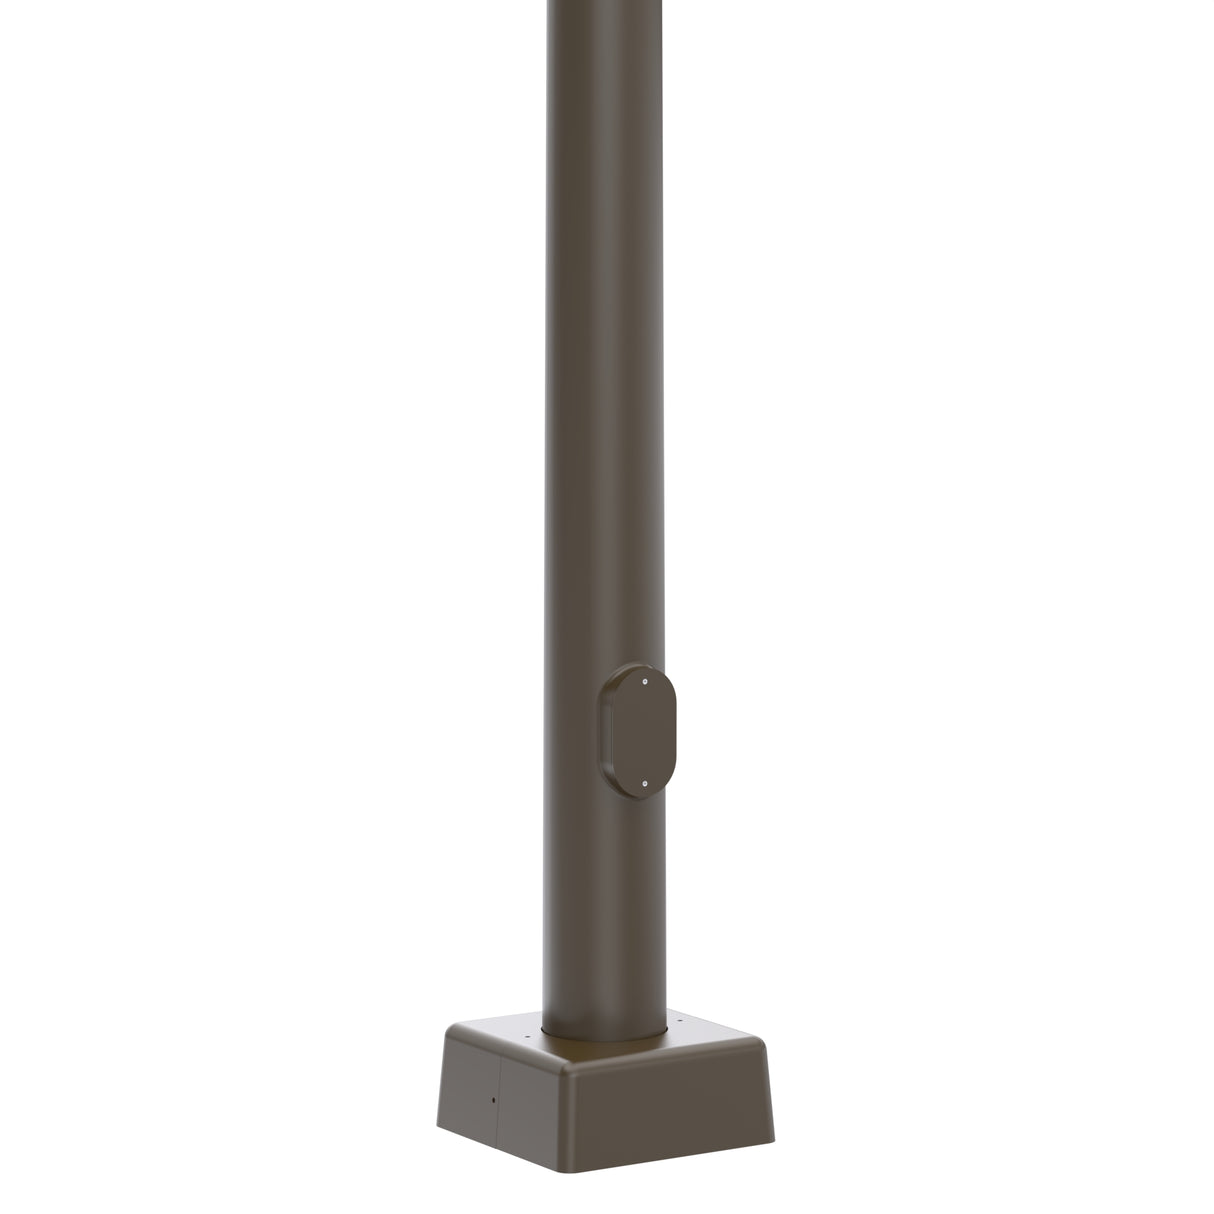 35' Tall x 7.3" Base OD x 2.4.0" Top OD x 11ga Thick, Round Tapered Steel, Anchor Base Light Pole